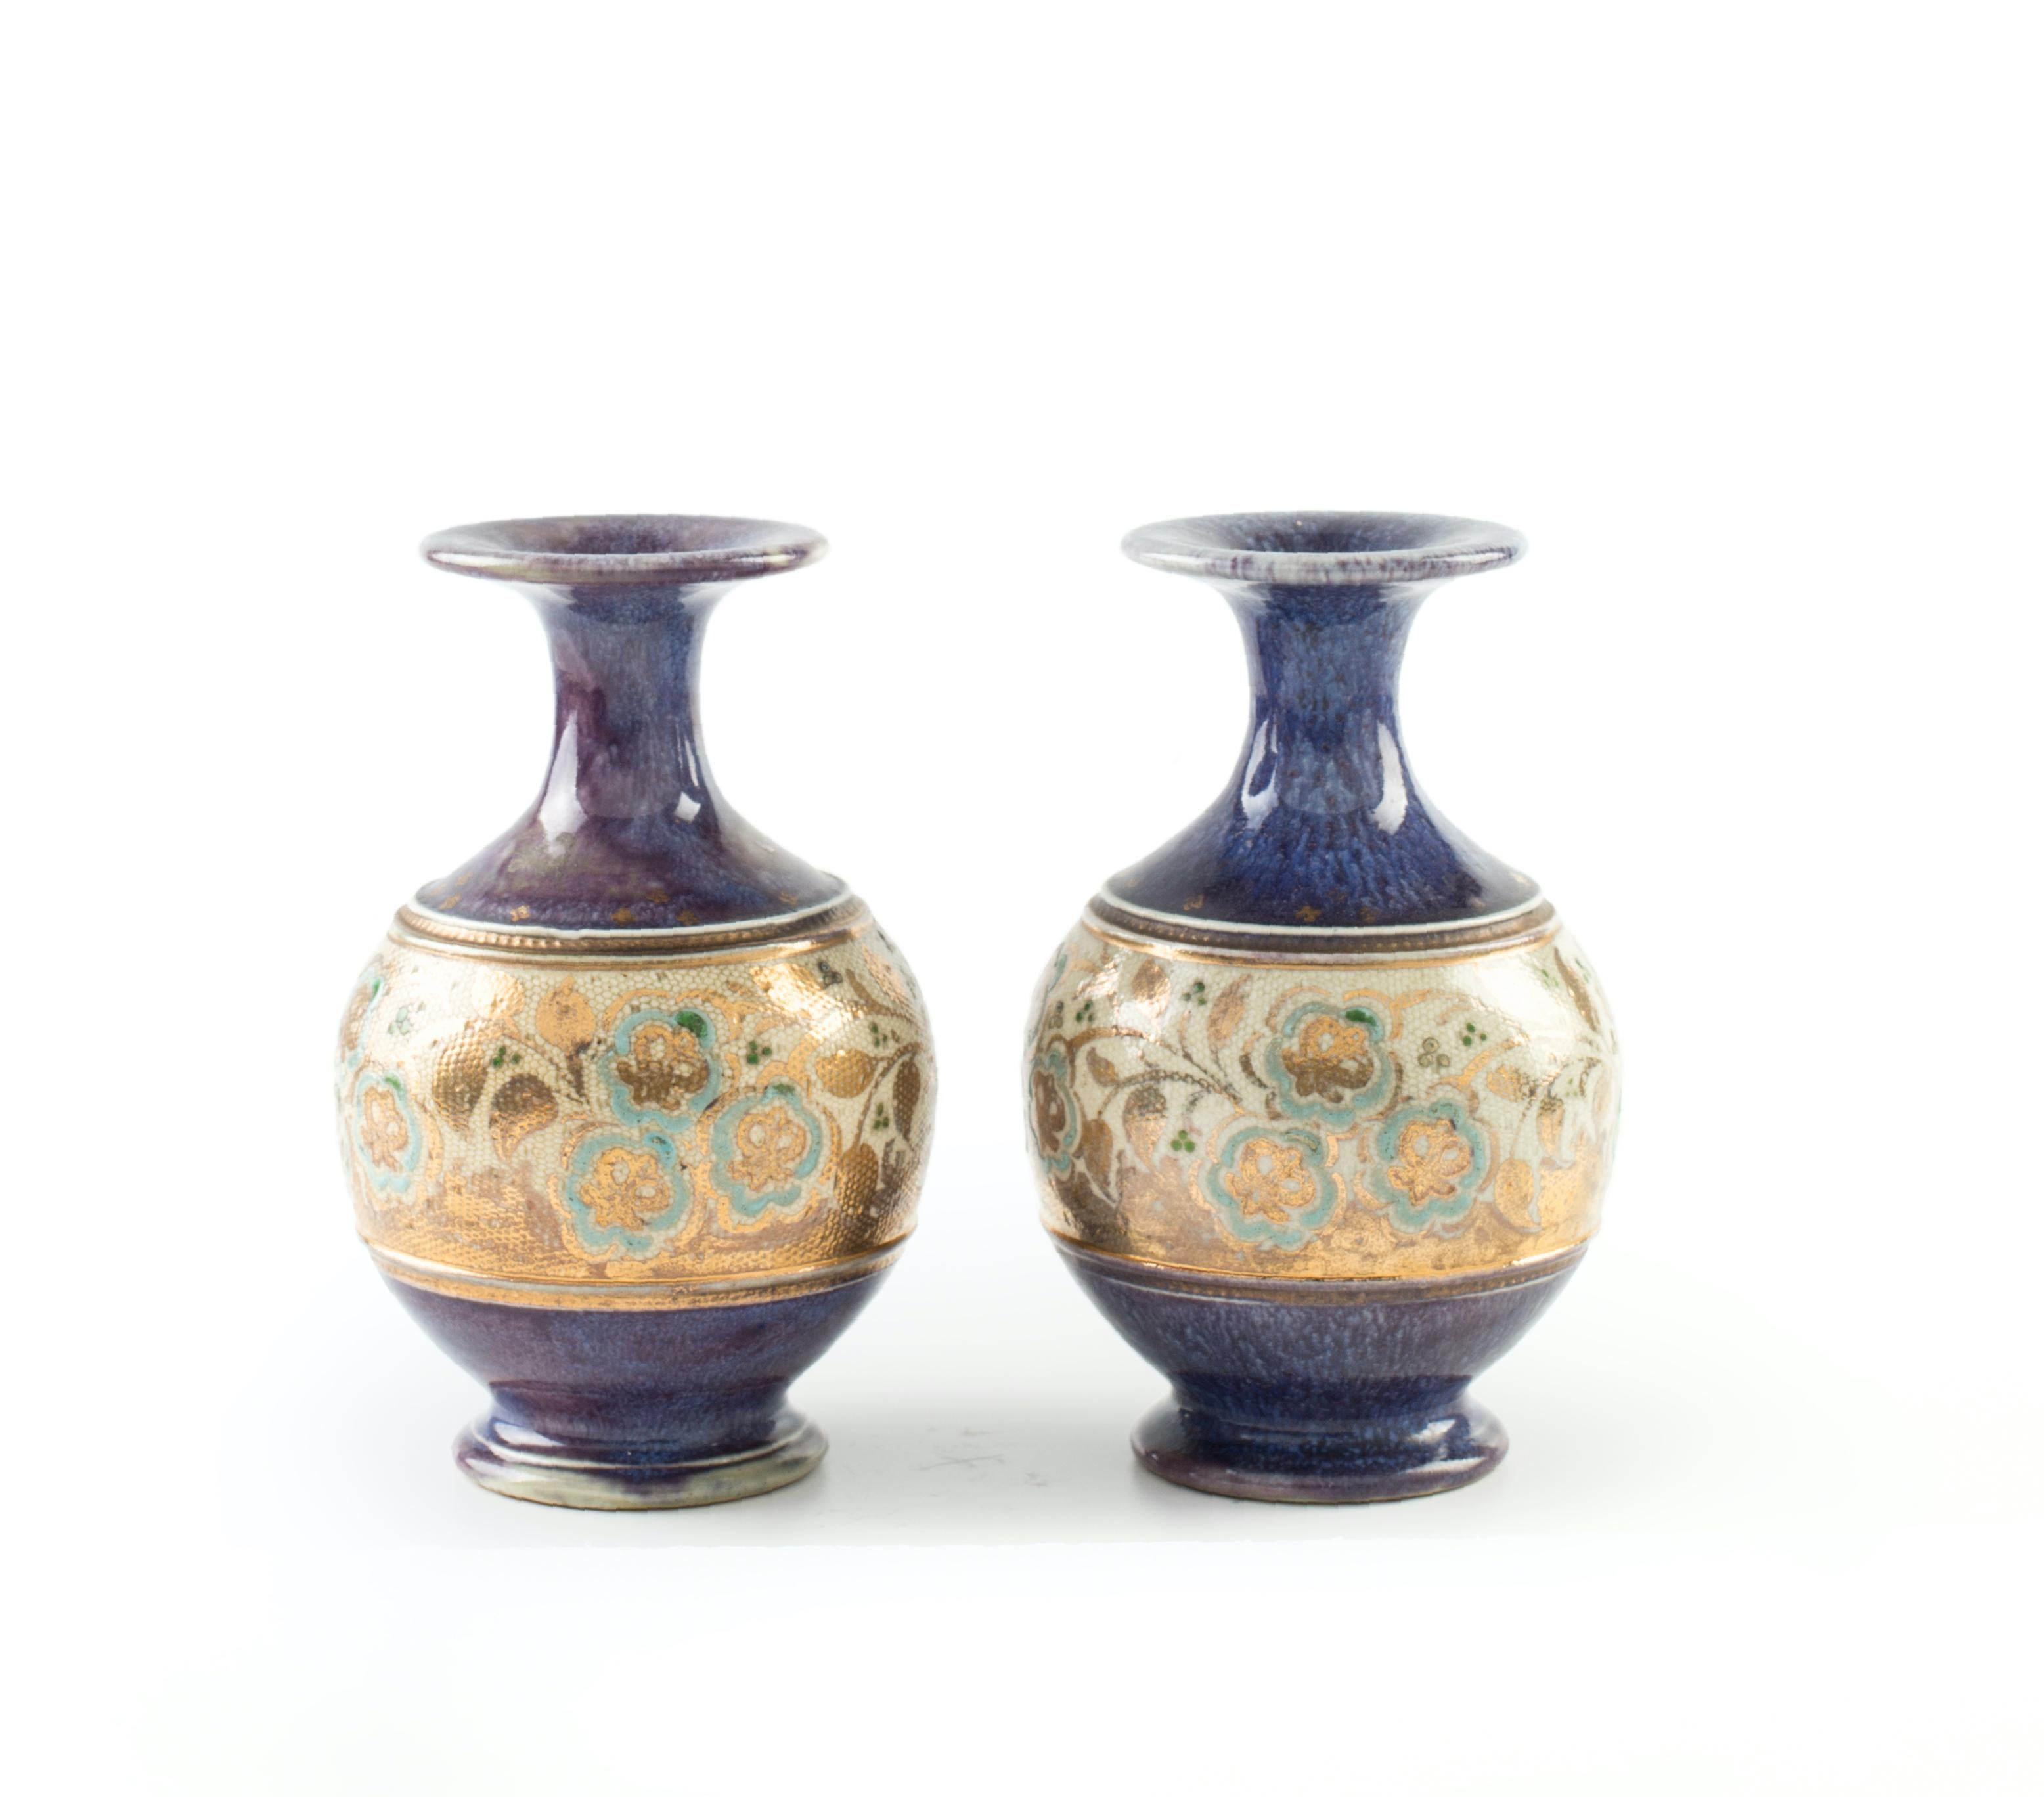 This couple of Royal Doulton vases is an original decorative object realized at the end of the 19th century.

This beautiful couple of terracotta vases were realized by the famous manufacturing company Royal Doulton.



Very good